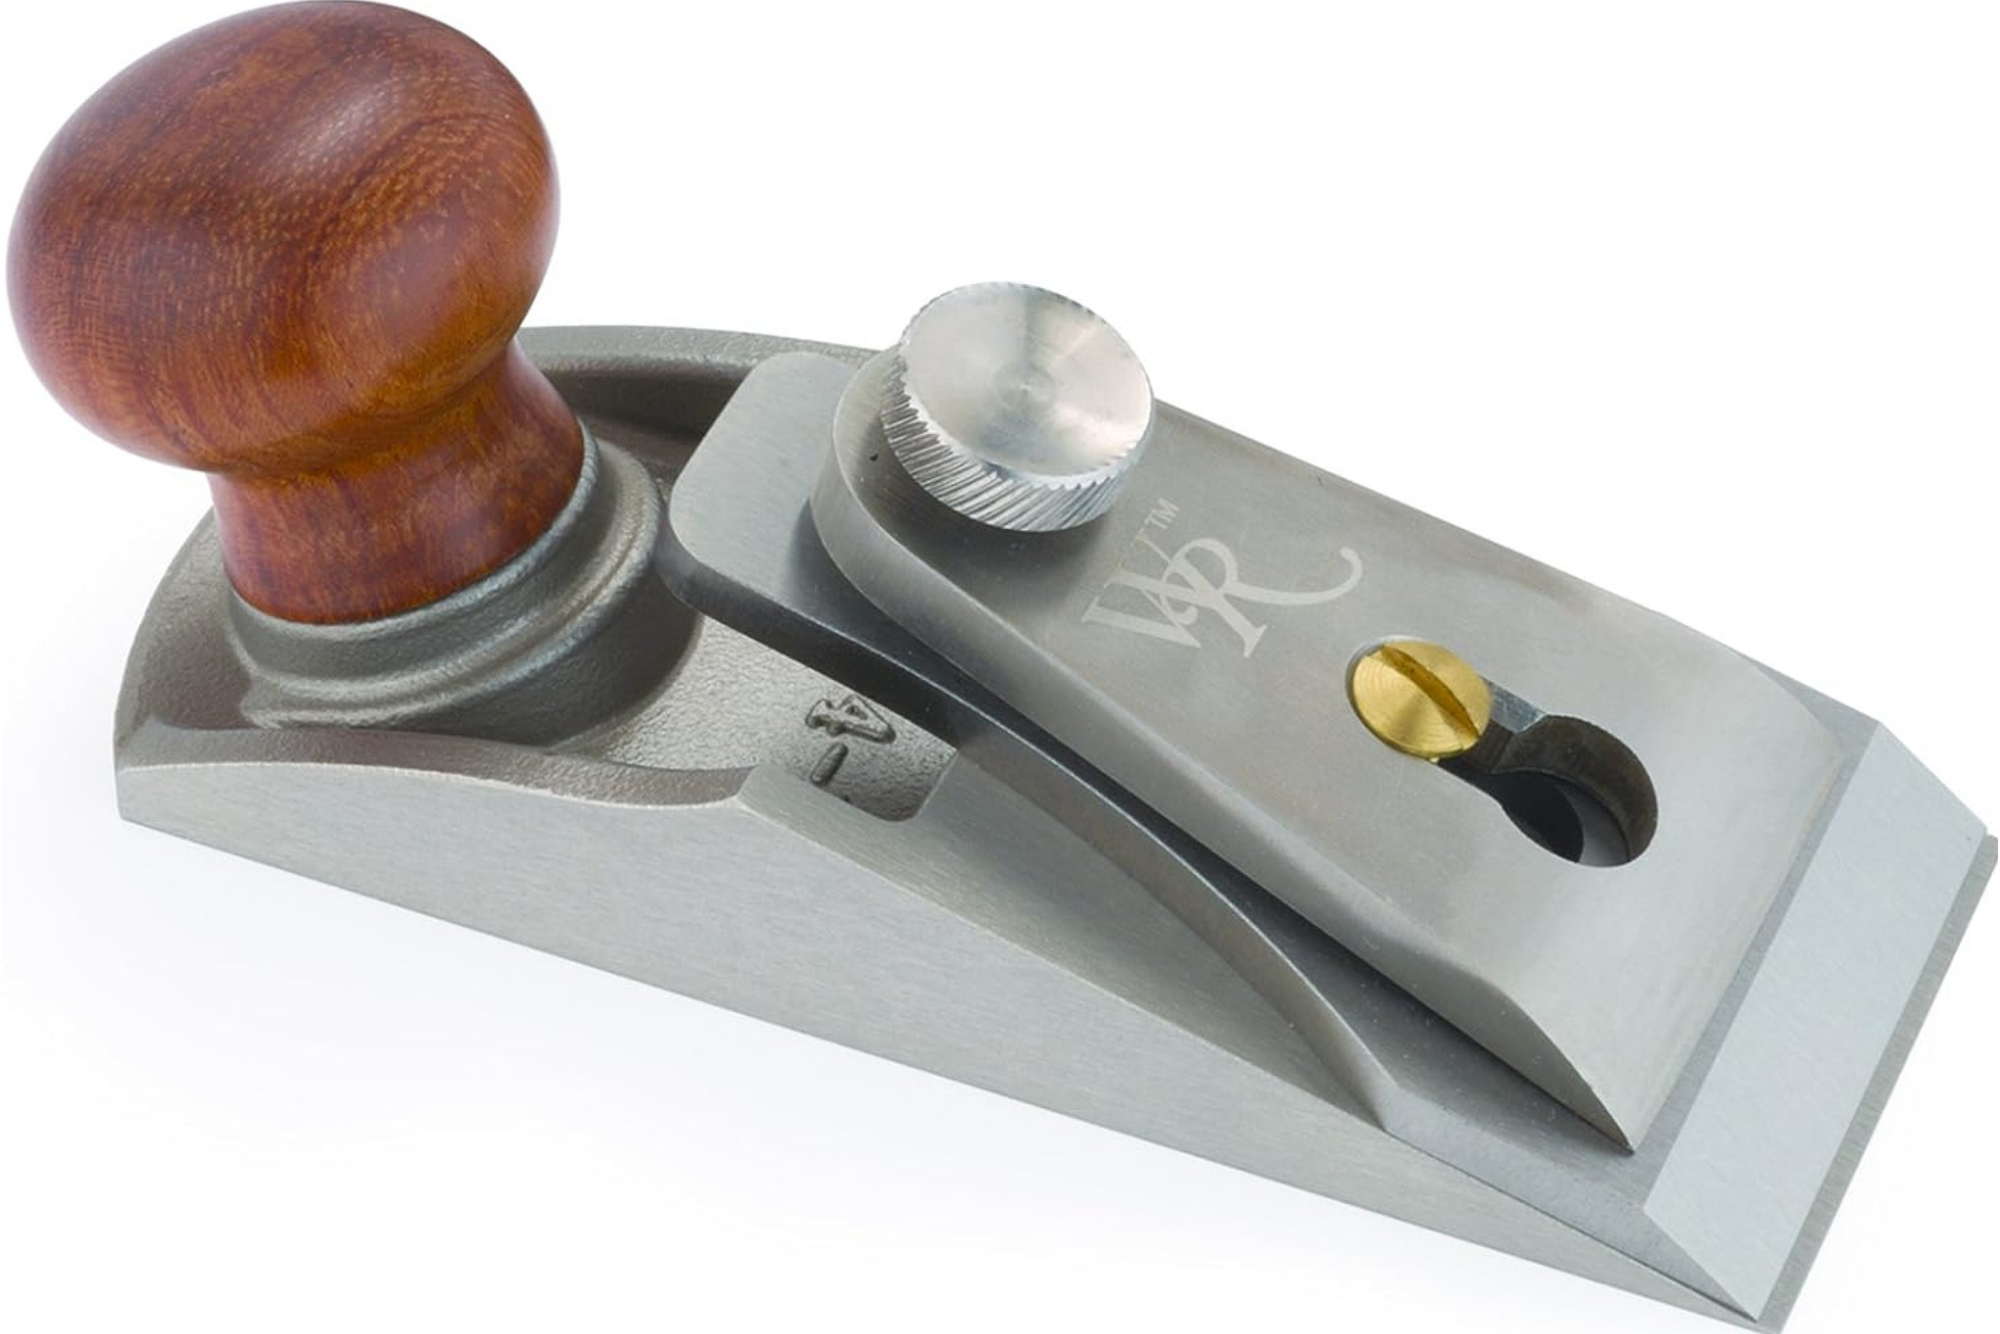 What Is A Chisel Plane?